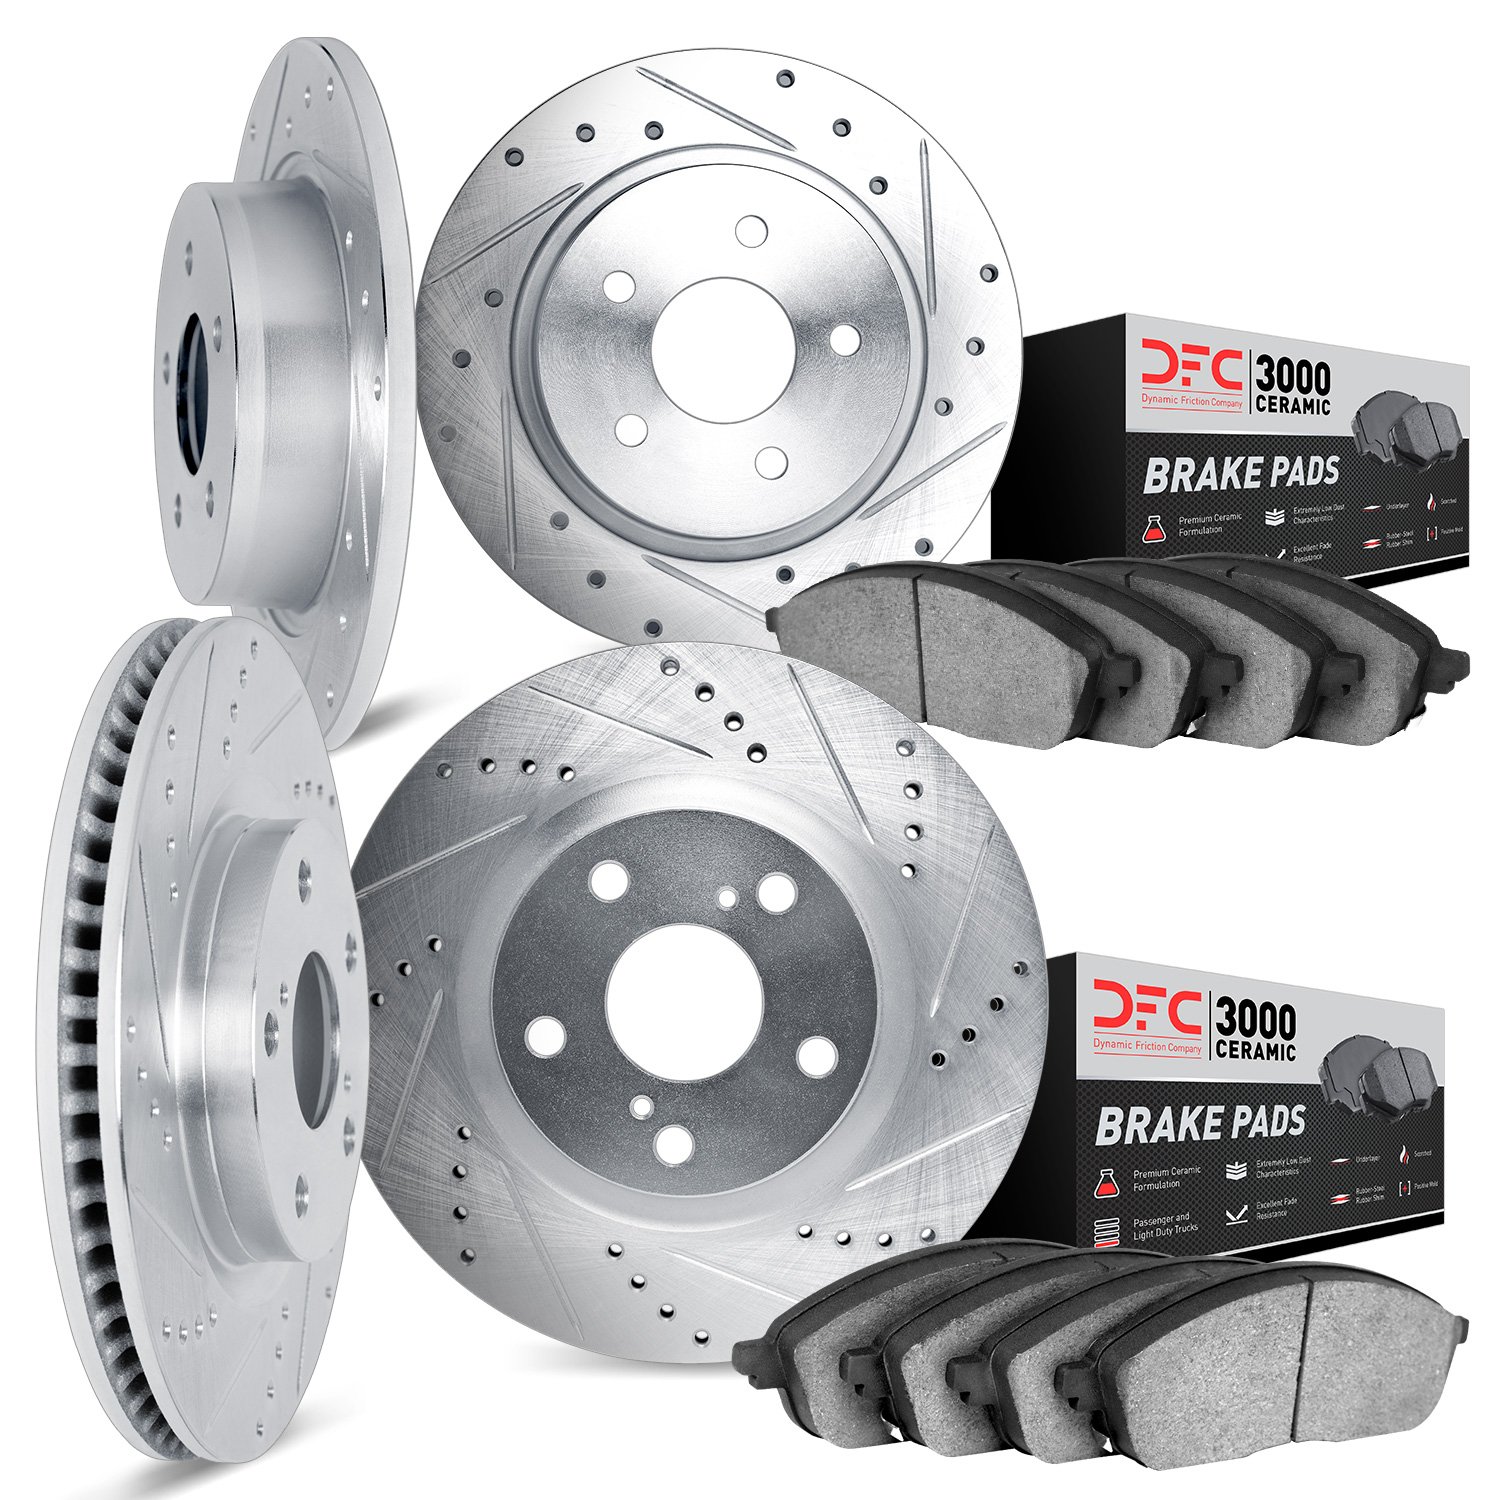 7304-76041 Drilled/Slotted Brake Rotor with 3000-Series Ceramic Brake Pads Kit [Silver], 1999-2001 Lexus/Toyota/Scion, Position: